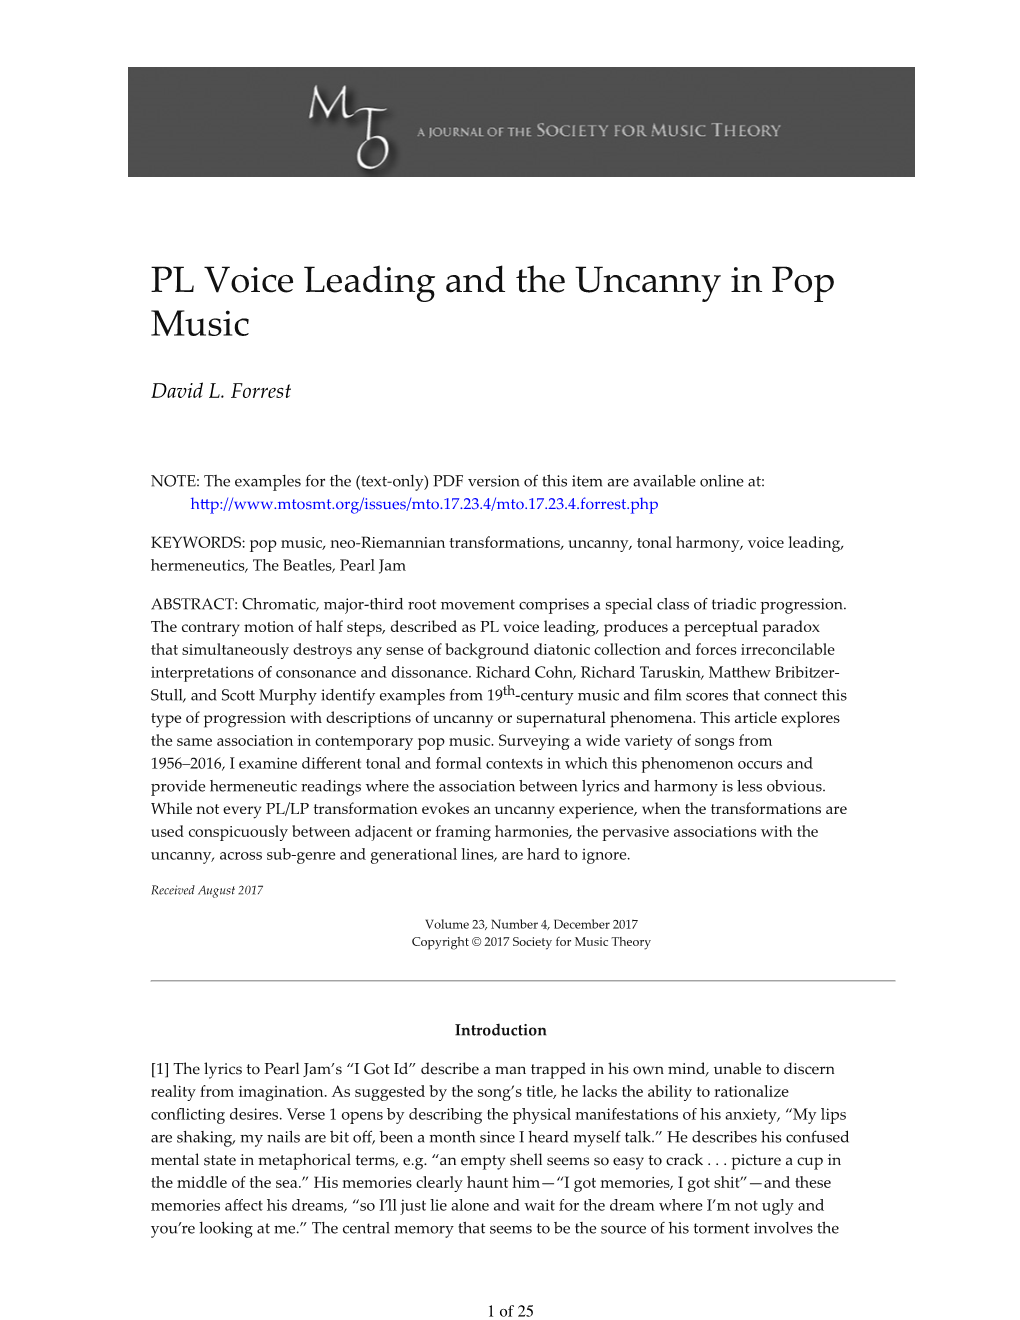 MTO 23.4: Forrest, PL Voice Leading and the Uncanny in Pop Music